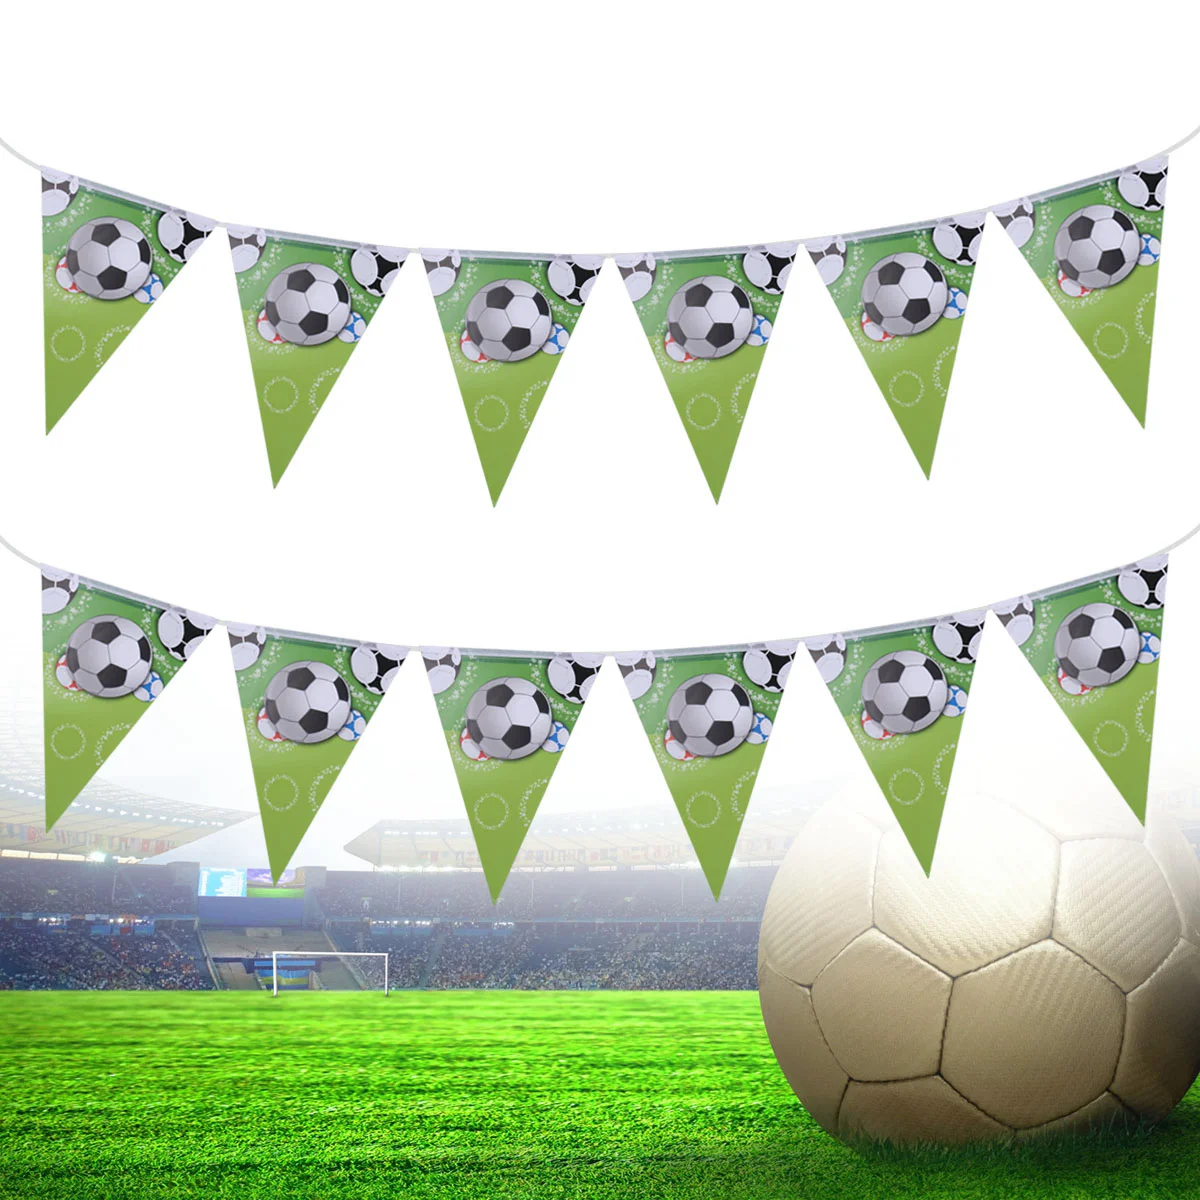 

Football Decorations Party Bunting Banner Flags Soccer Birthday Themed England Theme